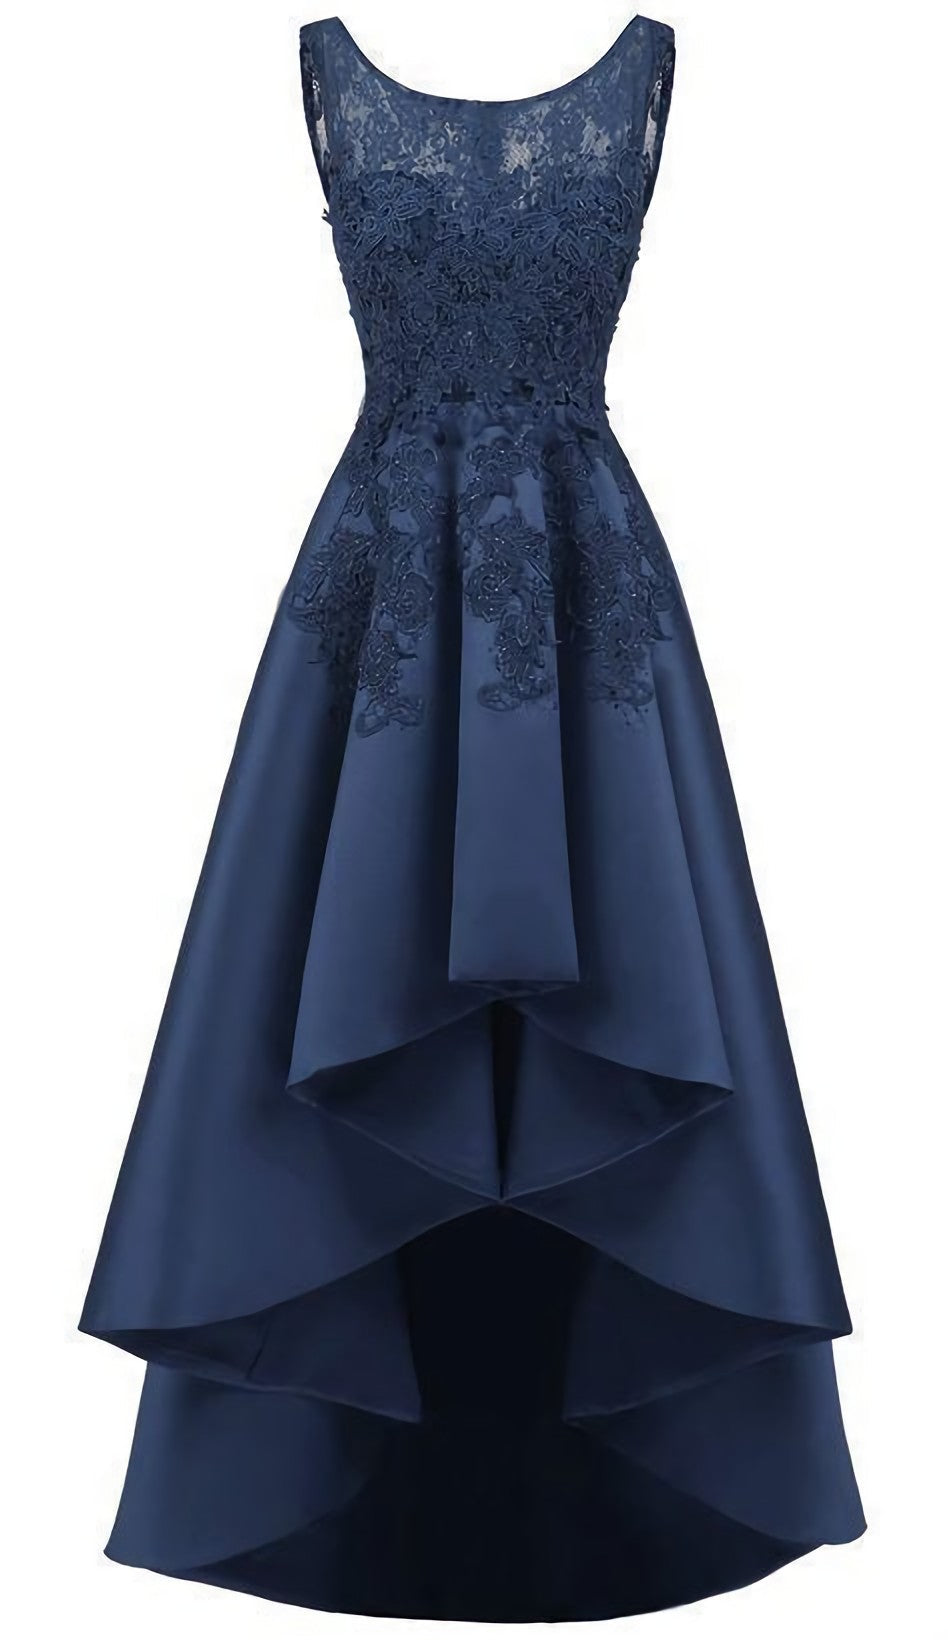 New Arrive Long Formal Prom Dress, Navy Blue Lace Beaded Wedding Party Dresses, High Low Bridesmaid Gowns Formal